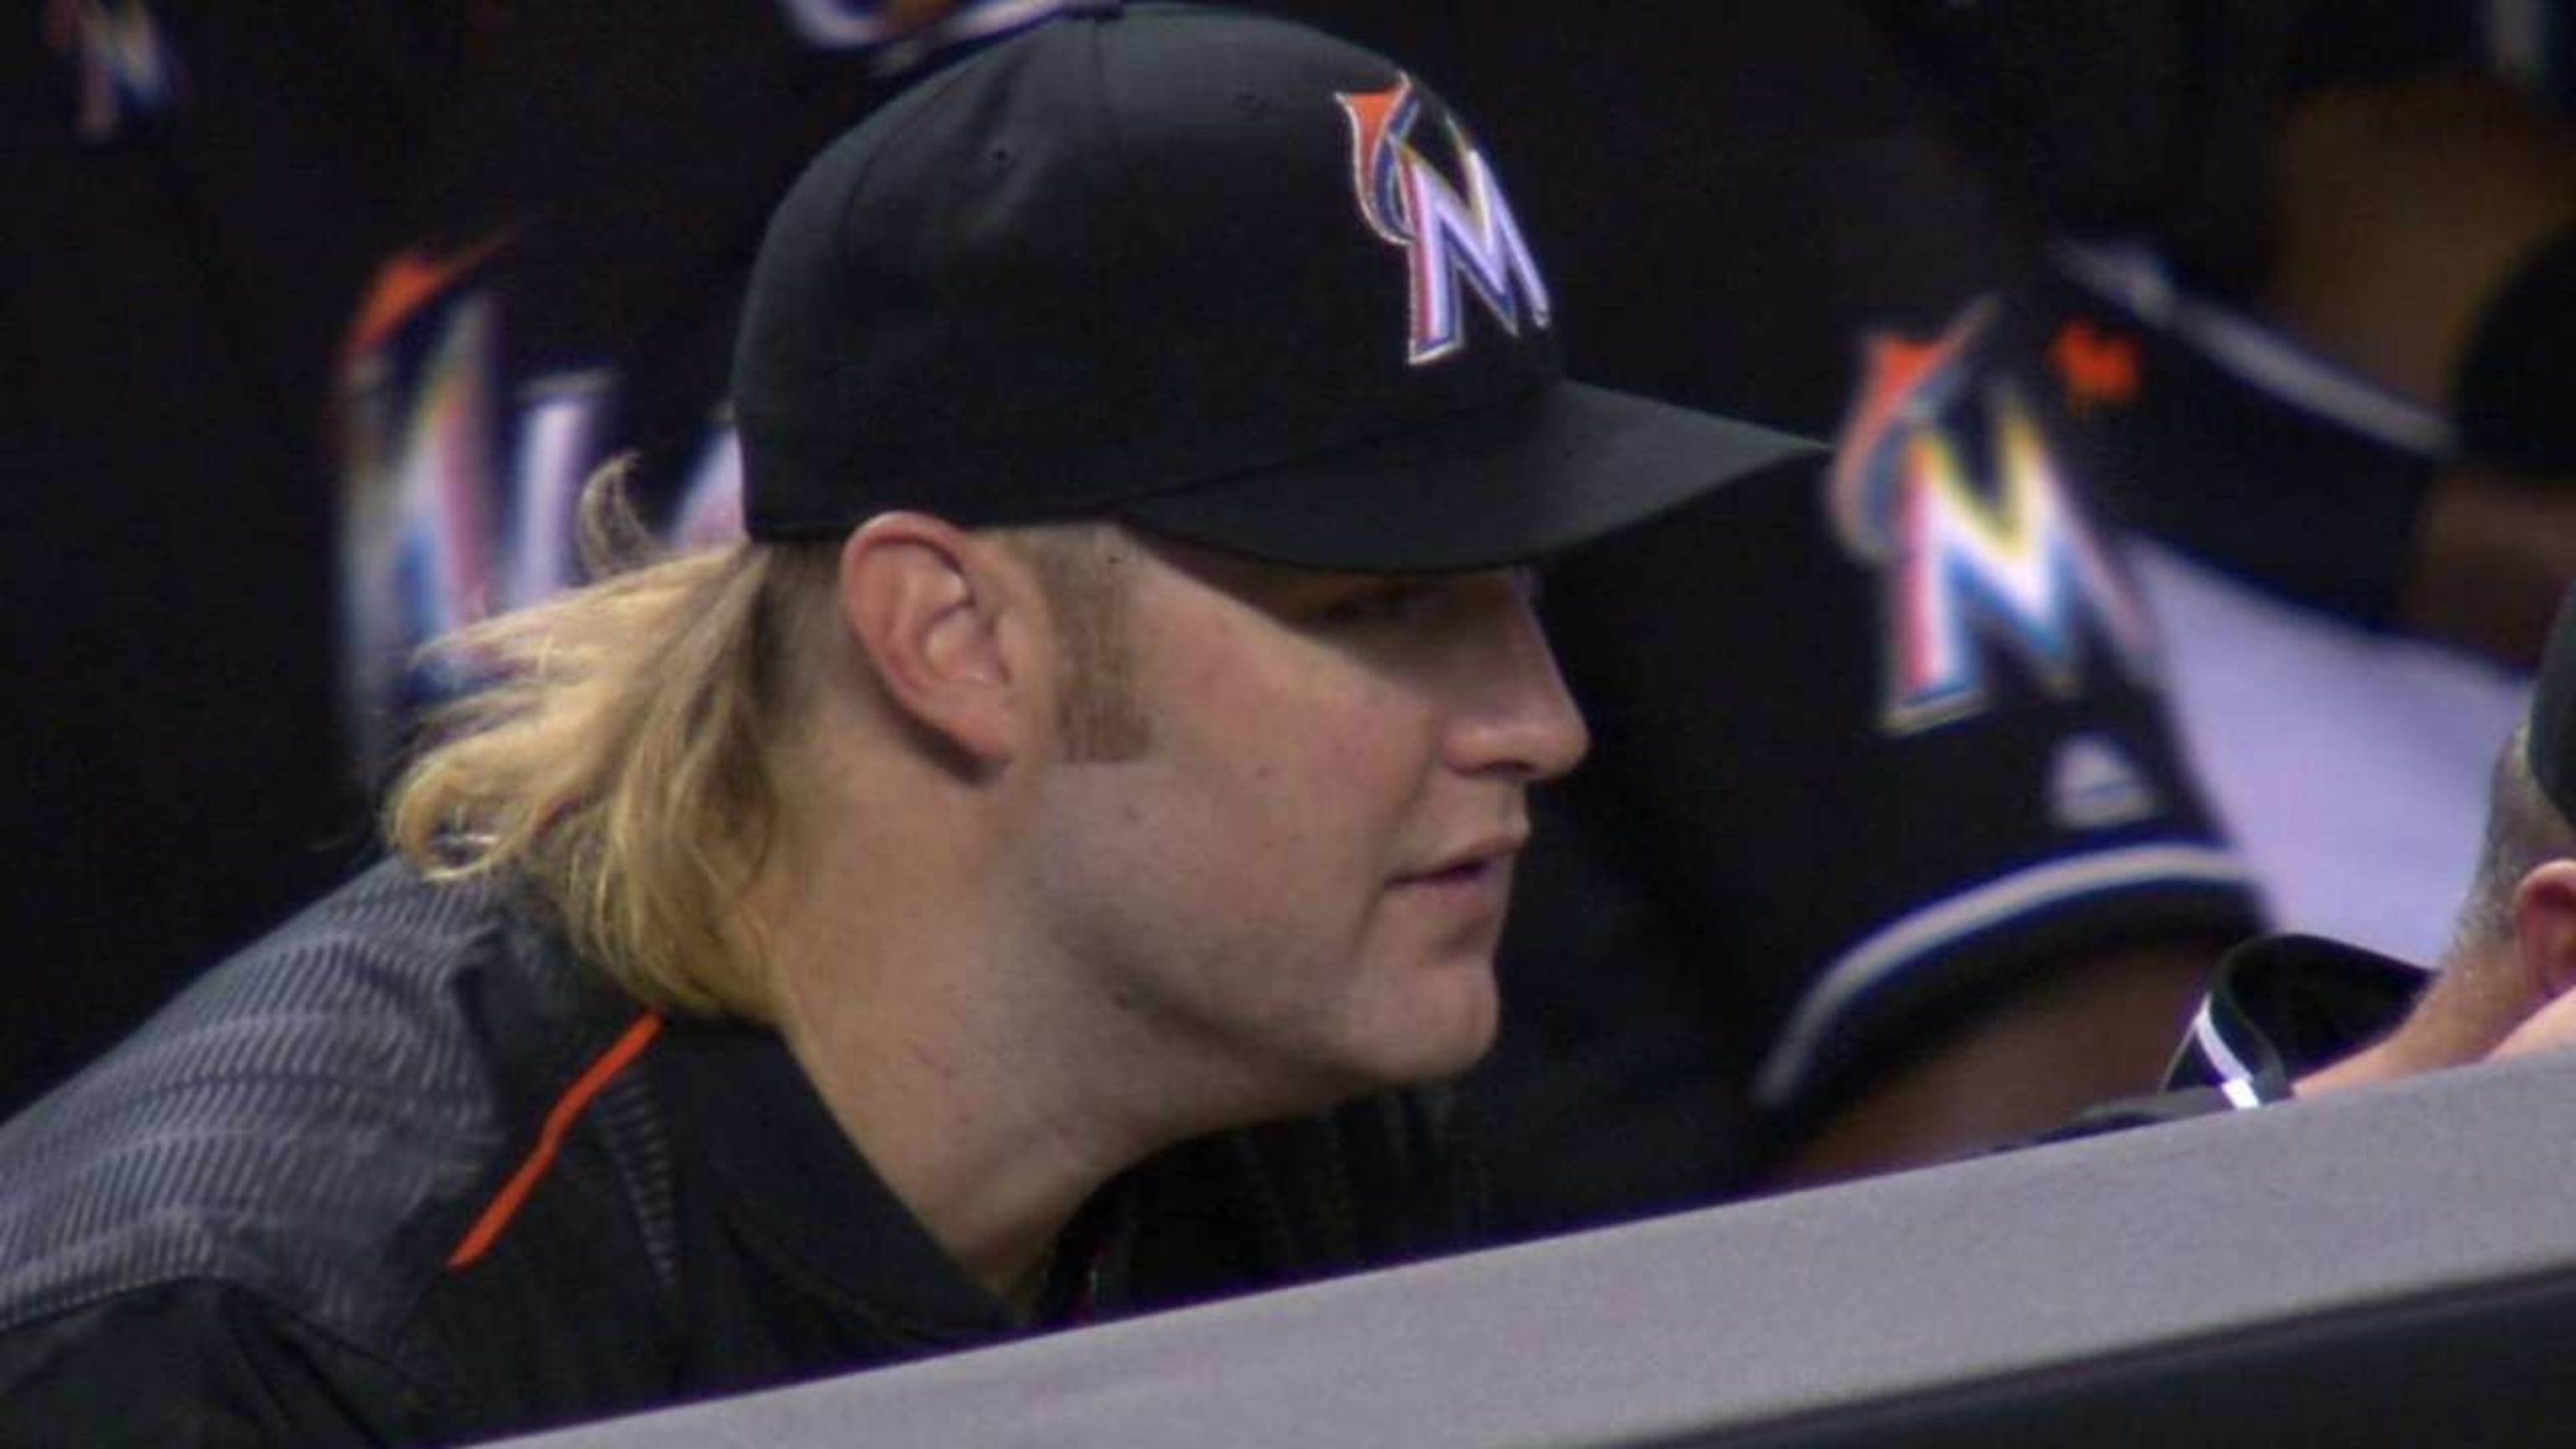 What's Your Sign(ature) - Miami Marlins